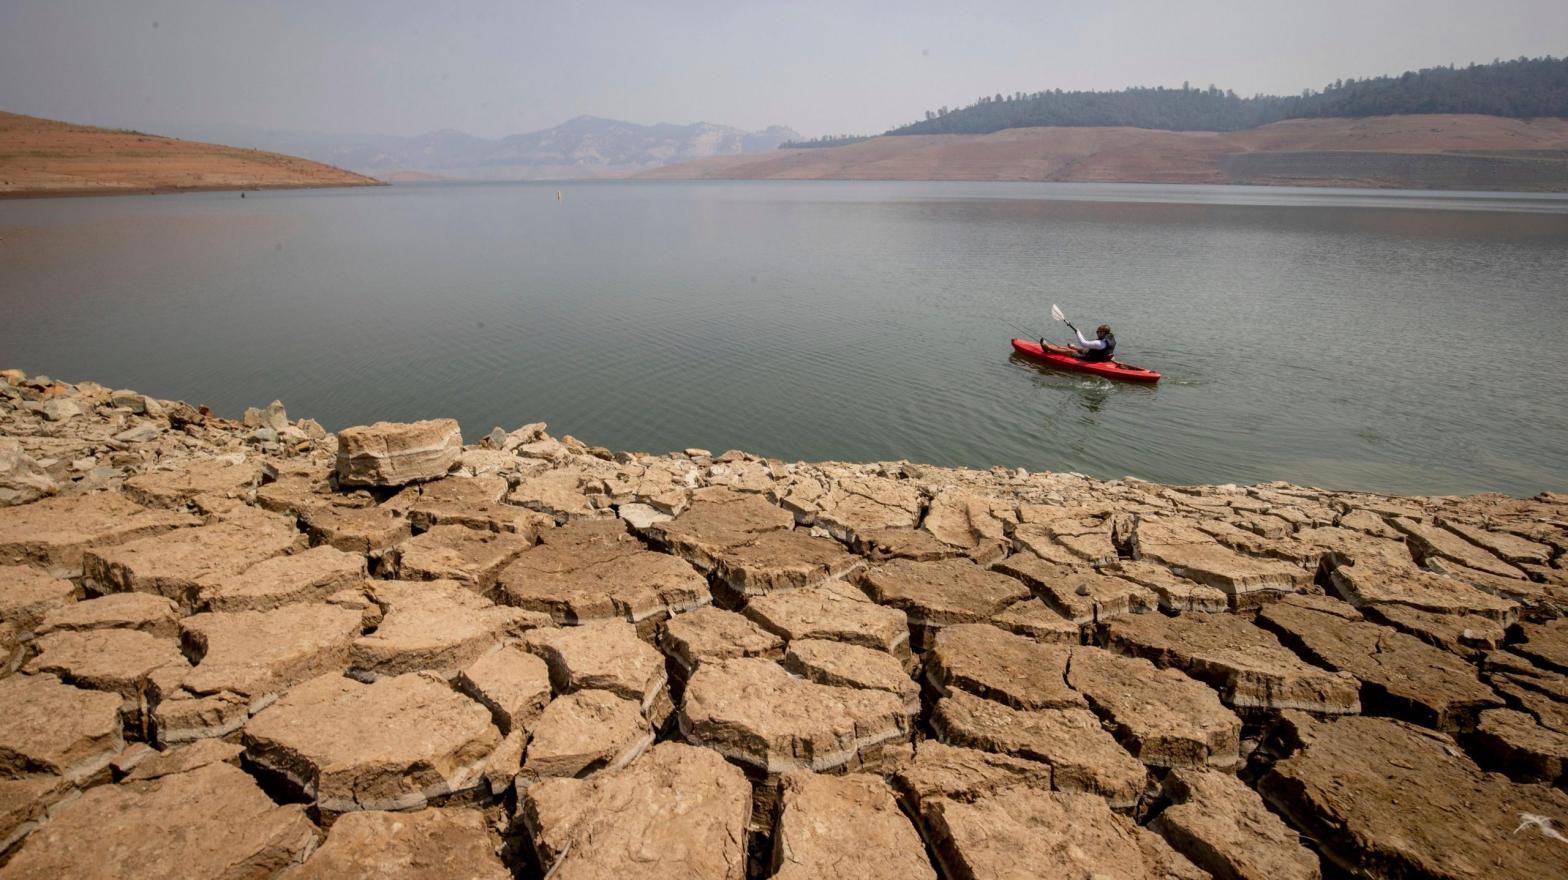 A kayaker fishes in Lake Oroville as water levels remain low due to continuing drought conditions in Oroville, California. (Photo: Ethan Swope, AP)